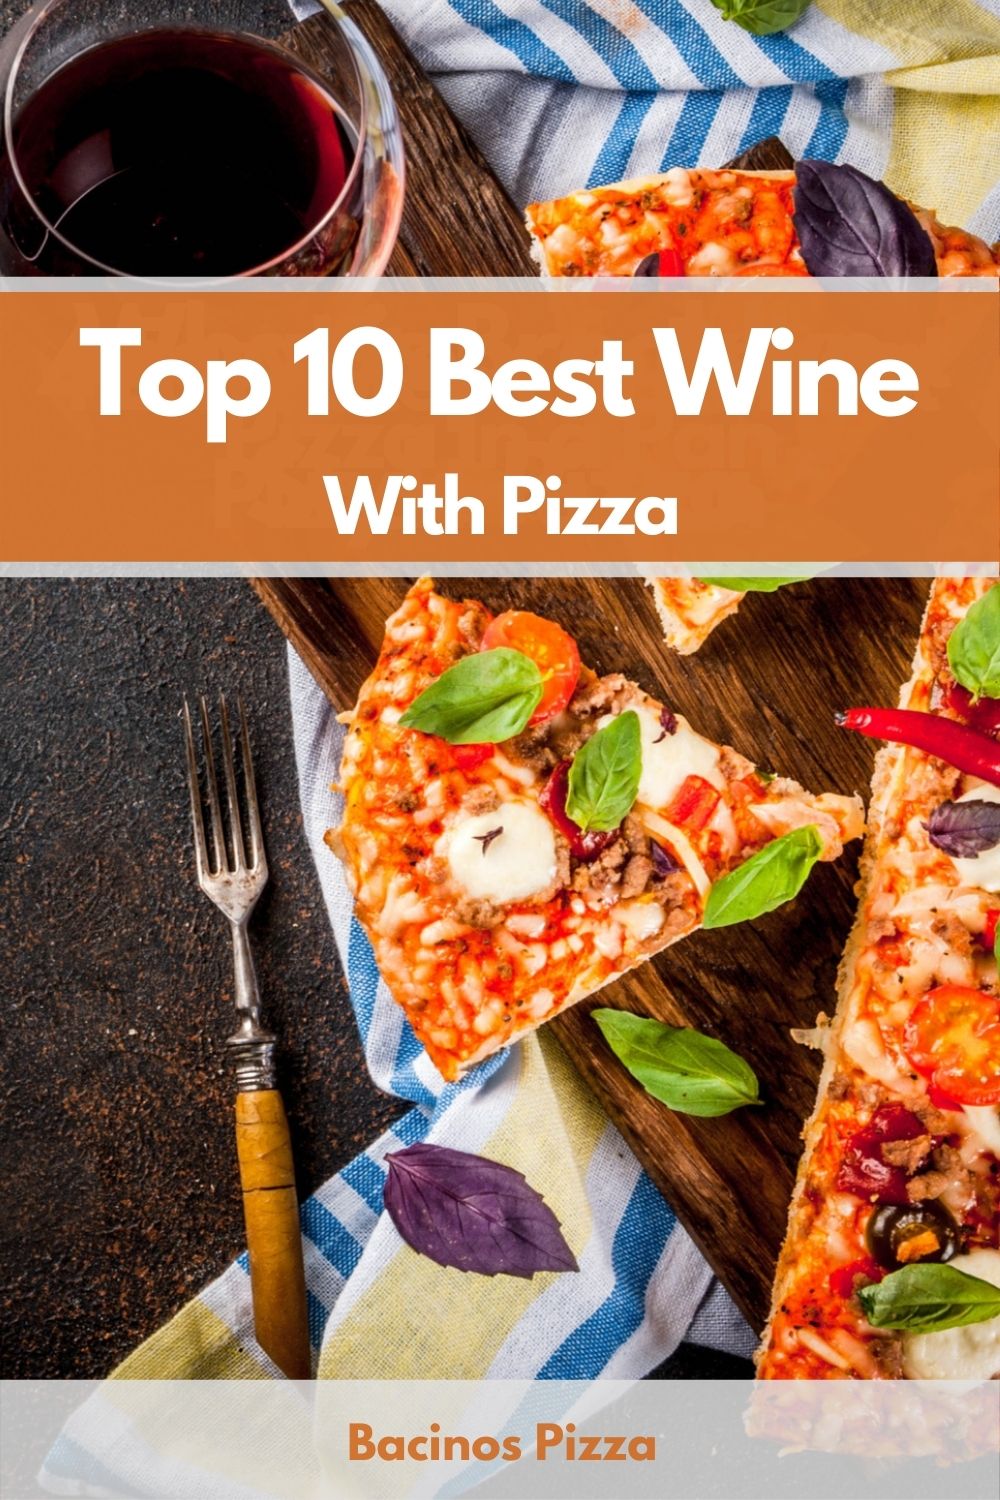 Top 10 Best Wine With Pizza pin 2